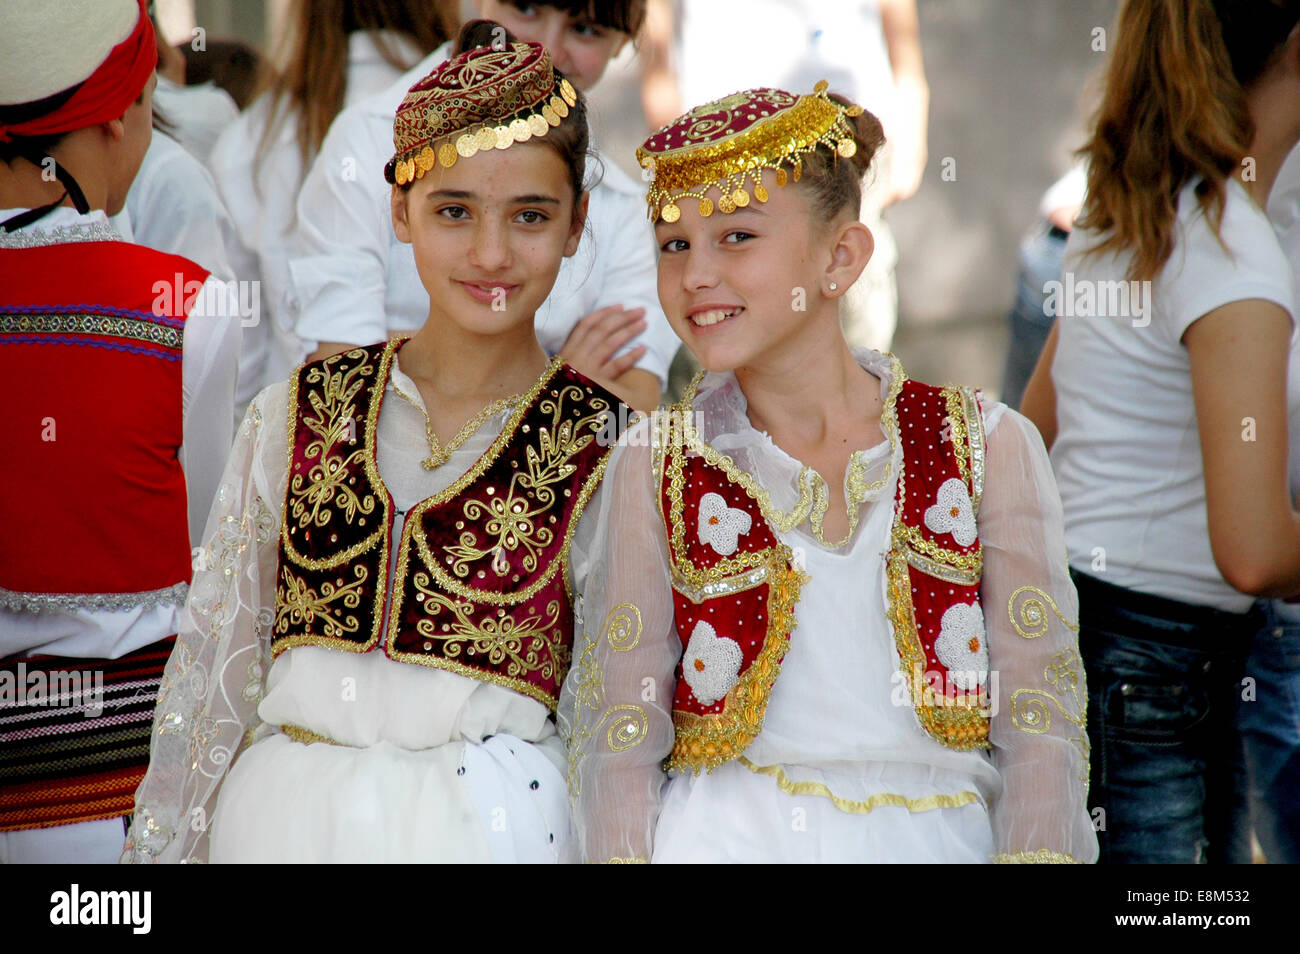 girls-performing-traditional-albanian-historical-dance-in-costumes-E8M532.jpg